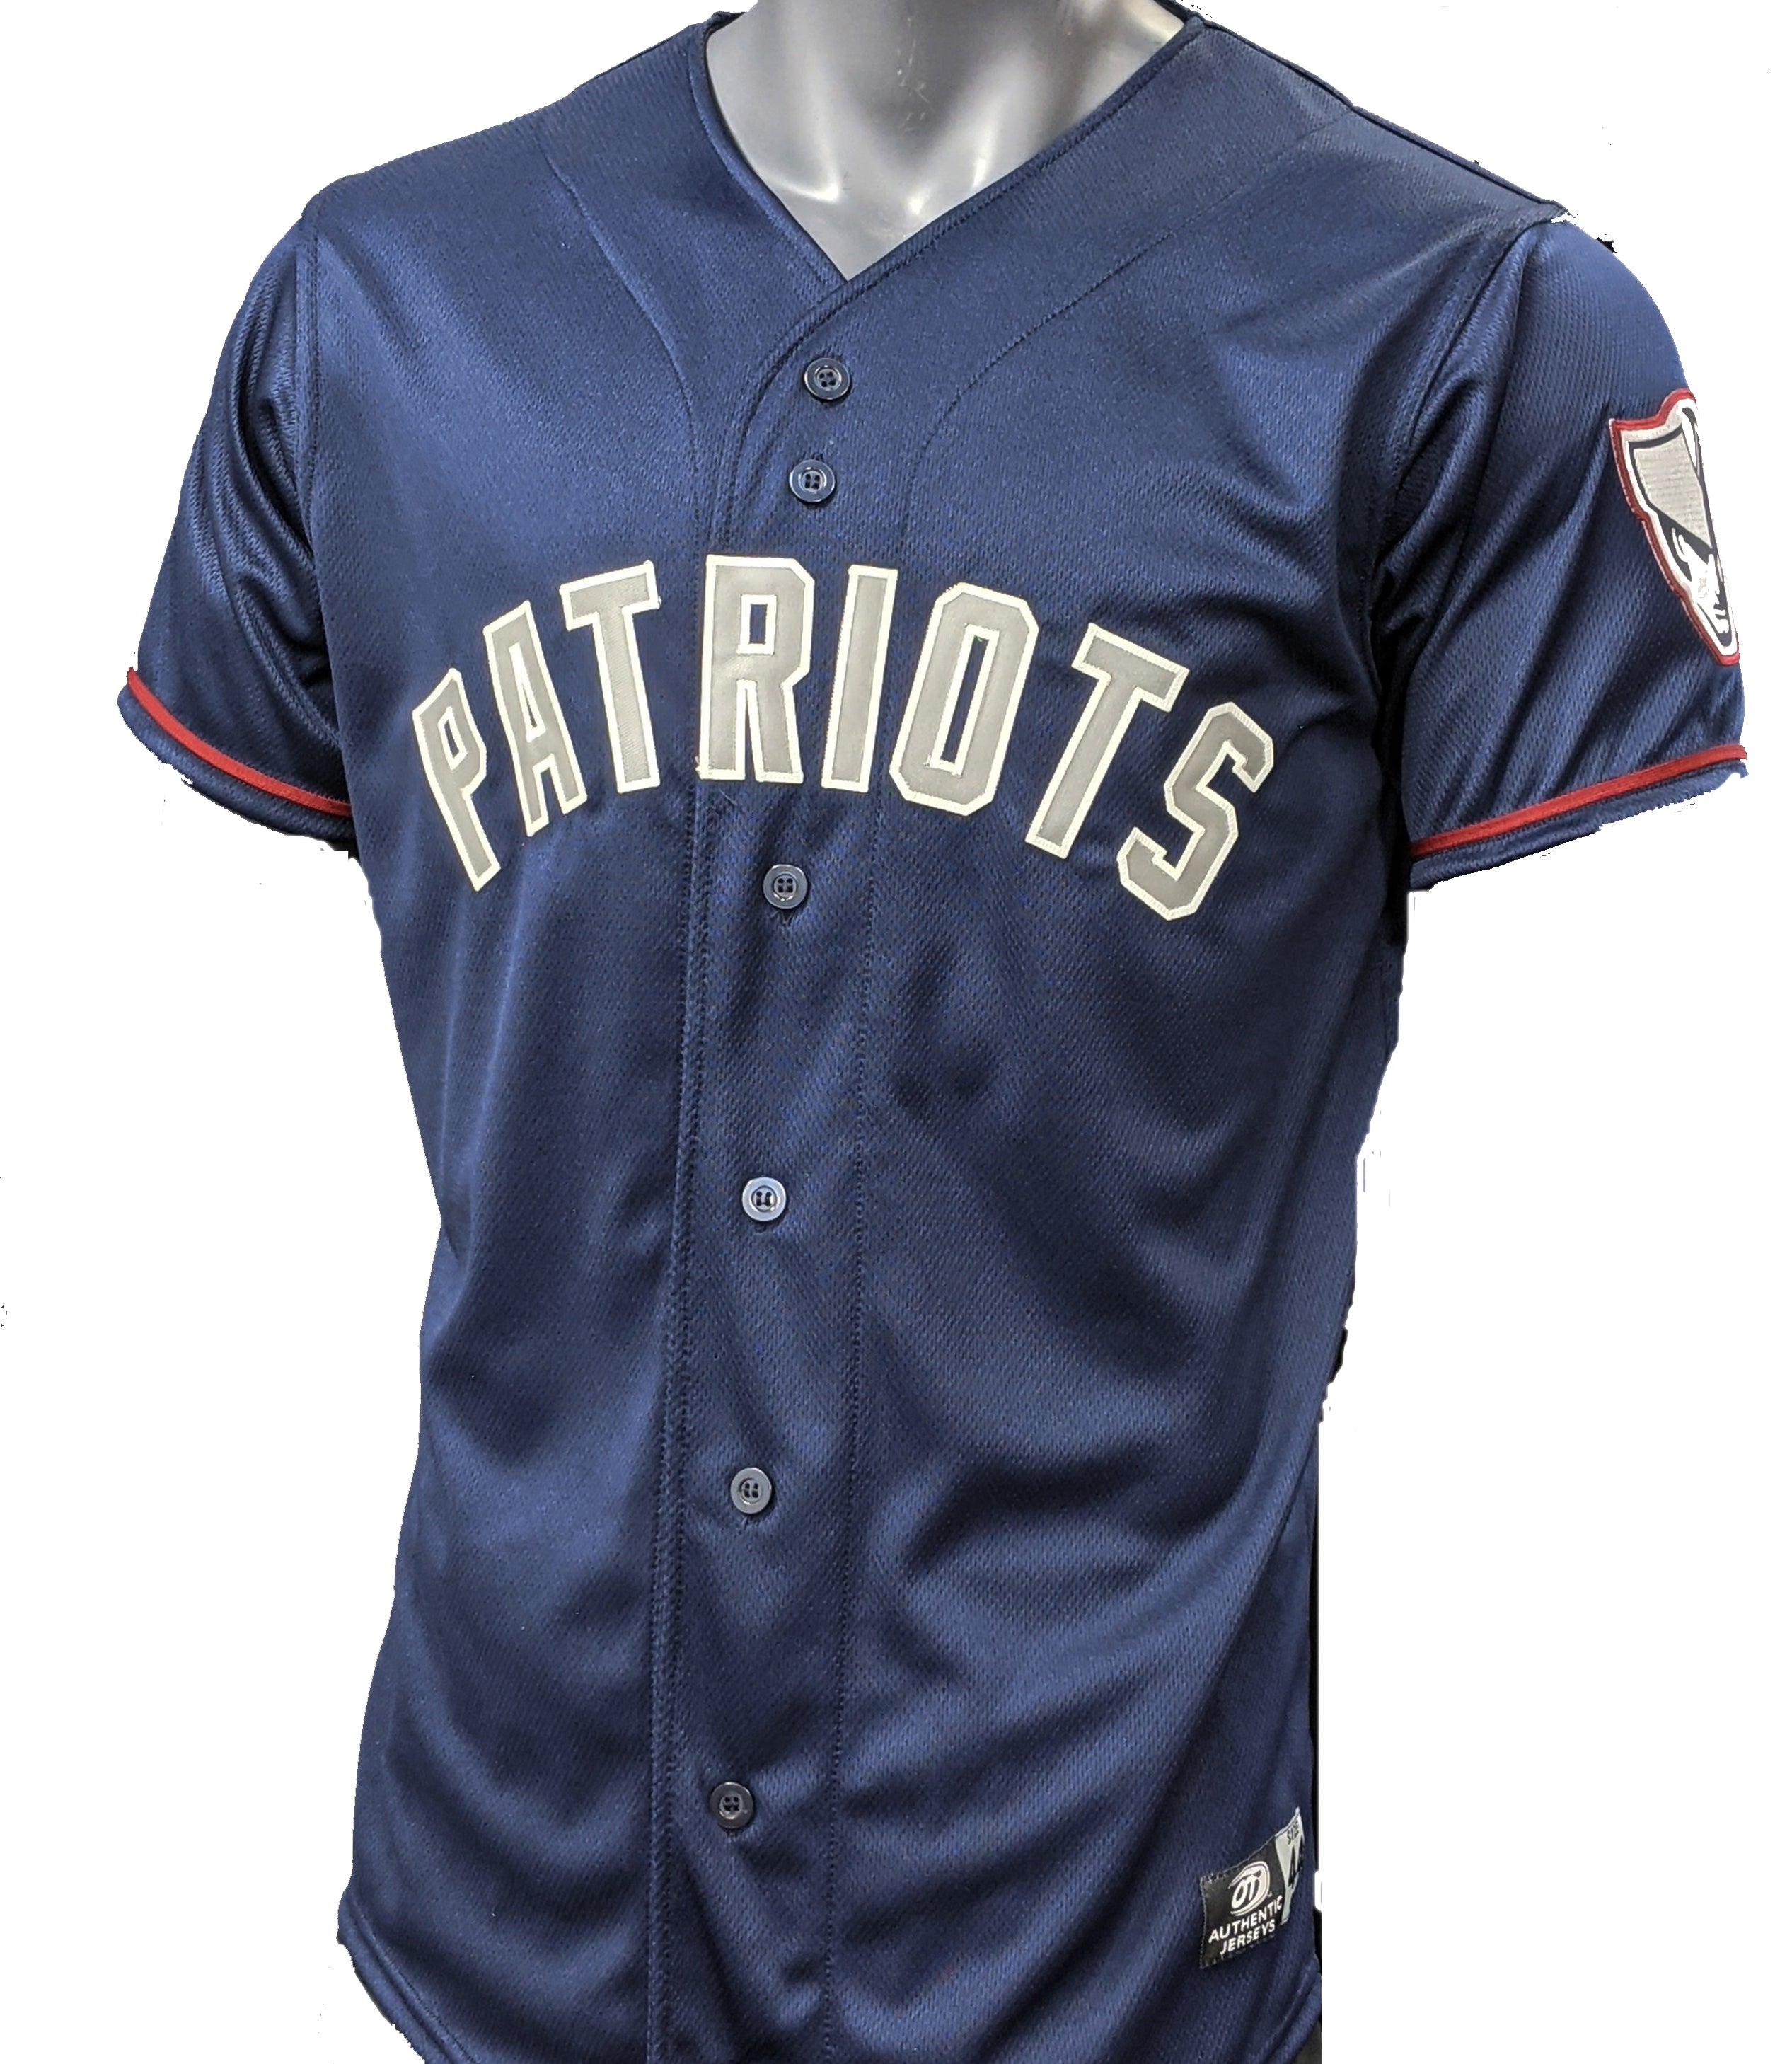 Somerset Patriots Official Adult Alternate Jersey Replica LG / Yes(+$20)